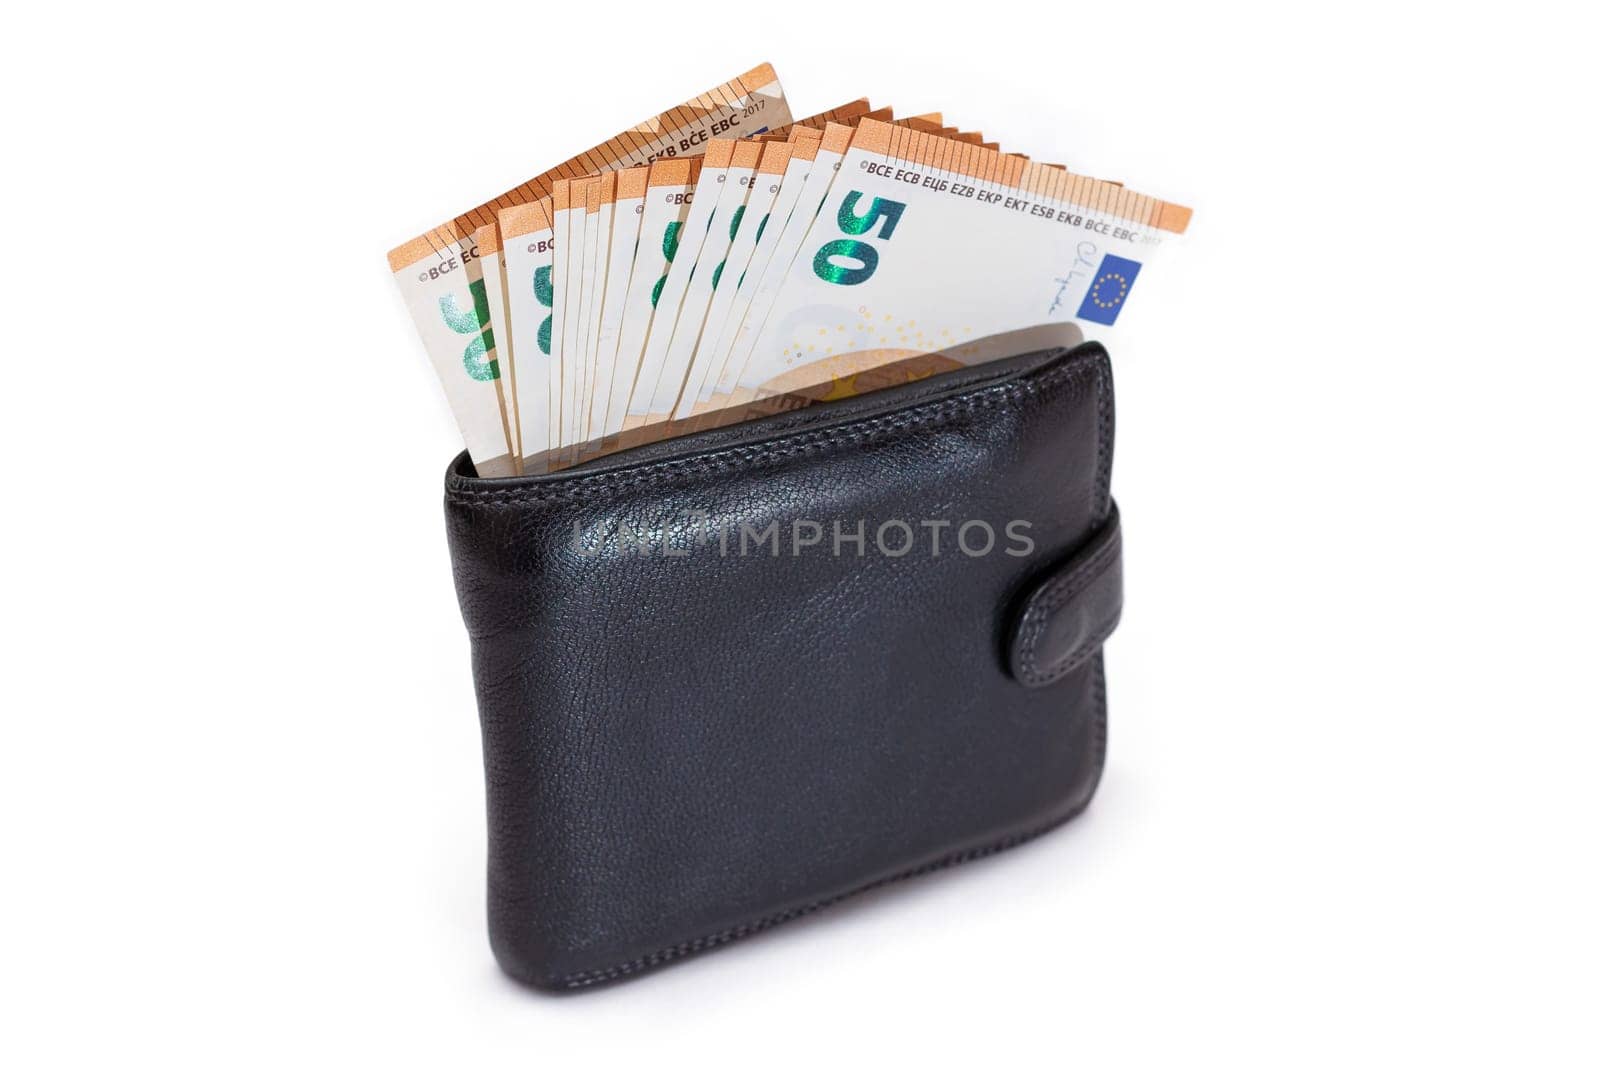 Black Leather Men Wallet with Fifty Euro Banknotes Inside - Isolated on White Background. A Purse Full of Money Symbolizing Wealth, Success and Social Status - Isolation